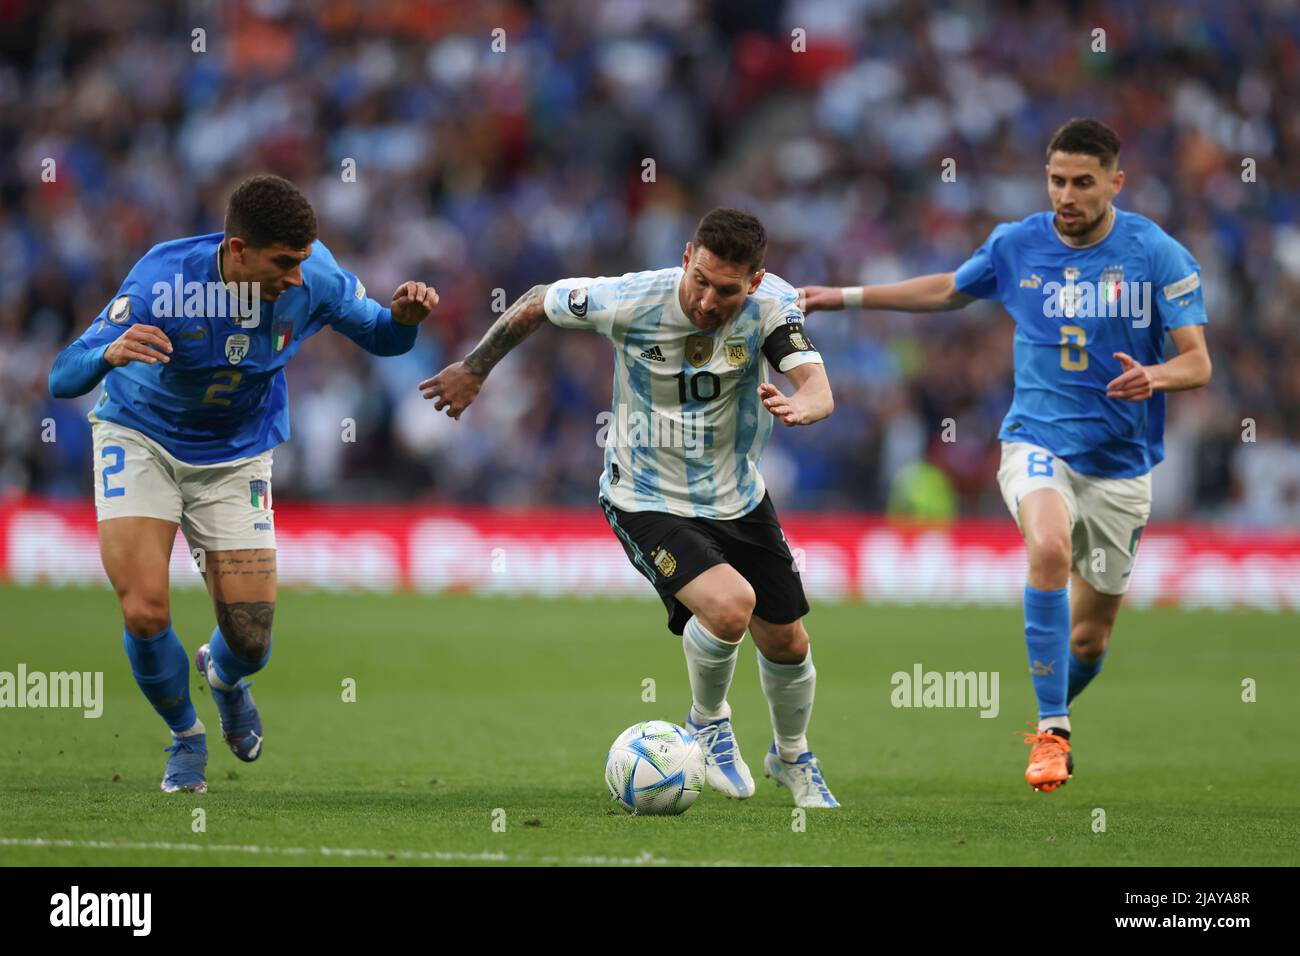 London, England, 1st June 2022. Lionel Messi of Argentina takes on Giovanni Di Lorenzo of Italy as Jorginho of Italy looks on during the CONMEBOL-UEFA Cup of Champions match at Wembley Stadium, London. Picture credit should read: Jonathan Moscrop / Sportimage Credit: Sportimage/Alamy Live News Credit: Sportimage/Alamy Live News Stock Photo